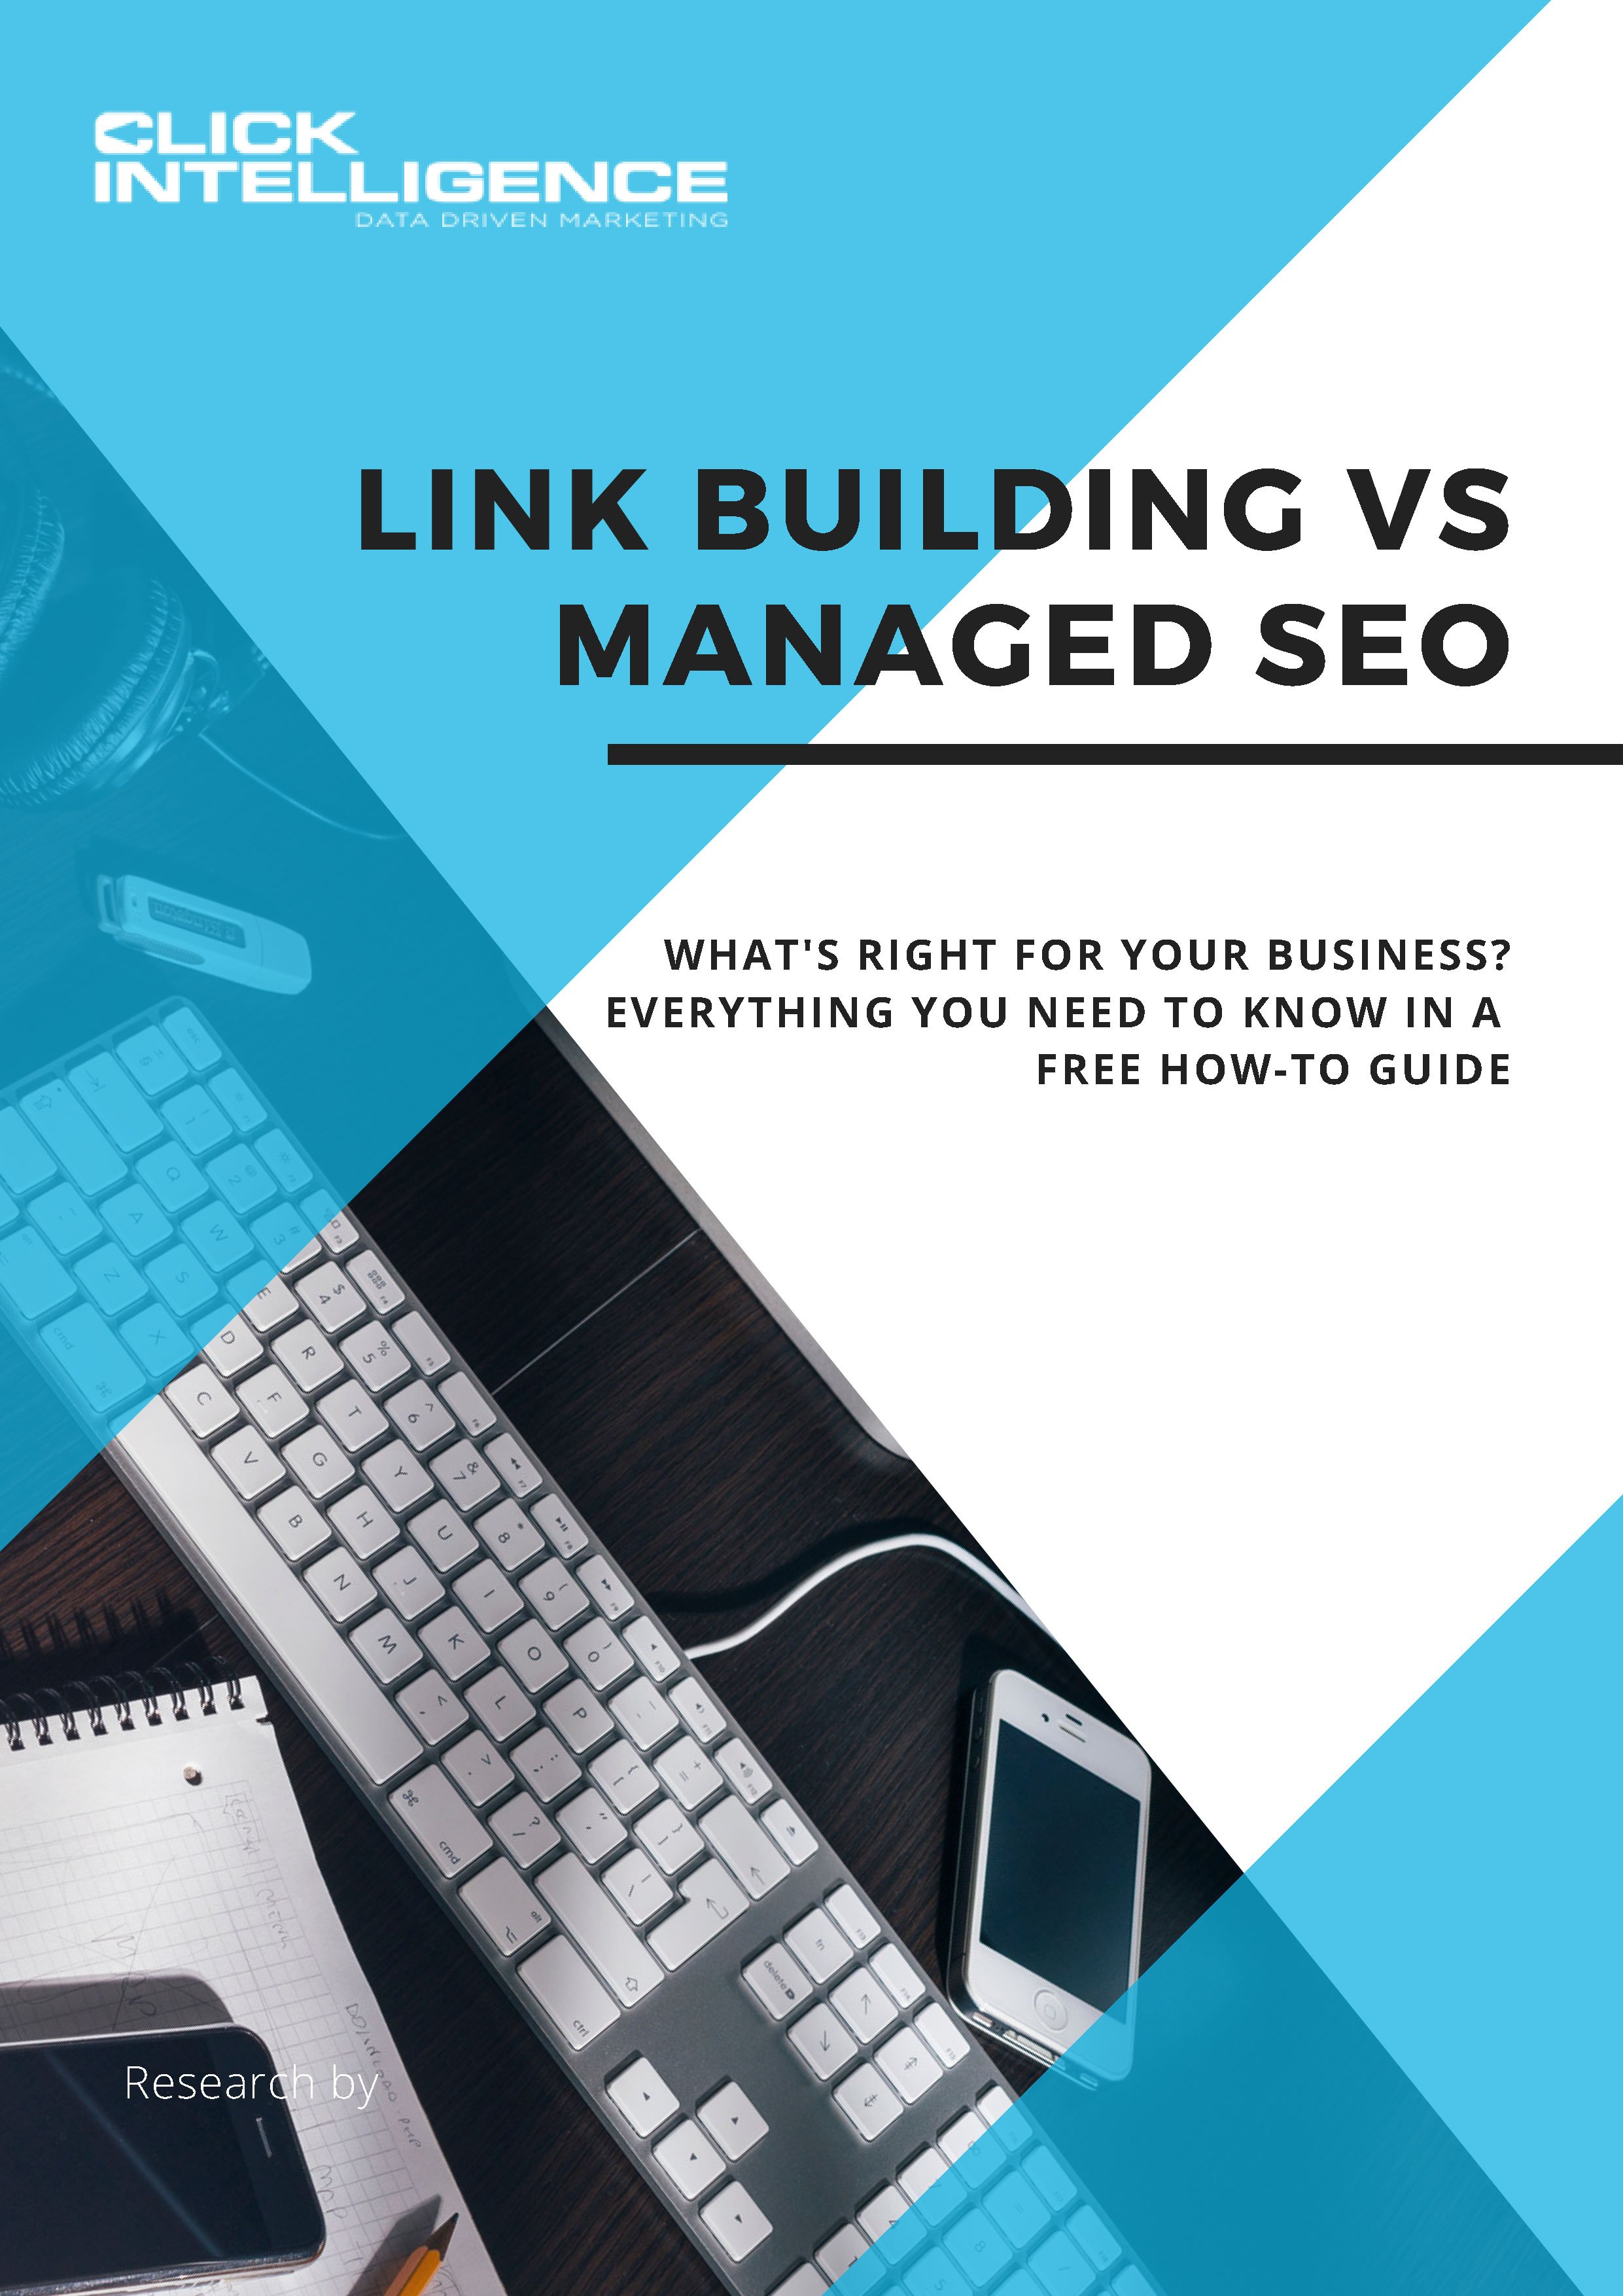 Link-Building-vs-Managed-SEO-Guide-1